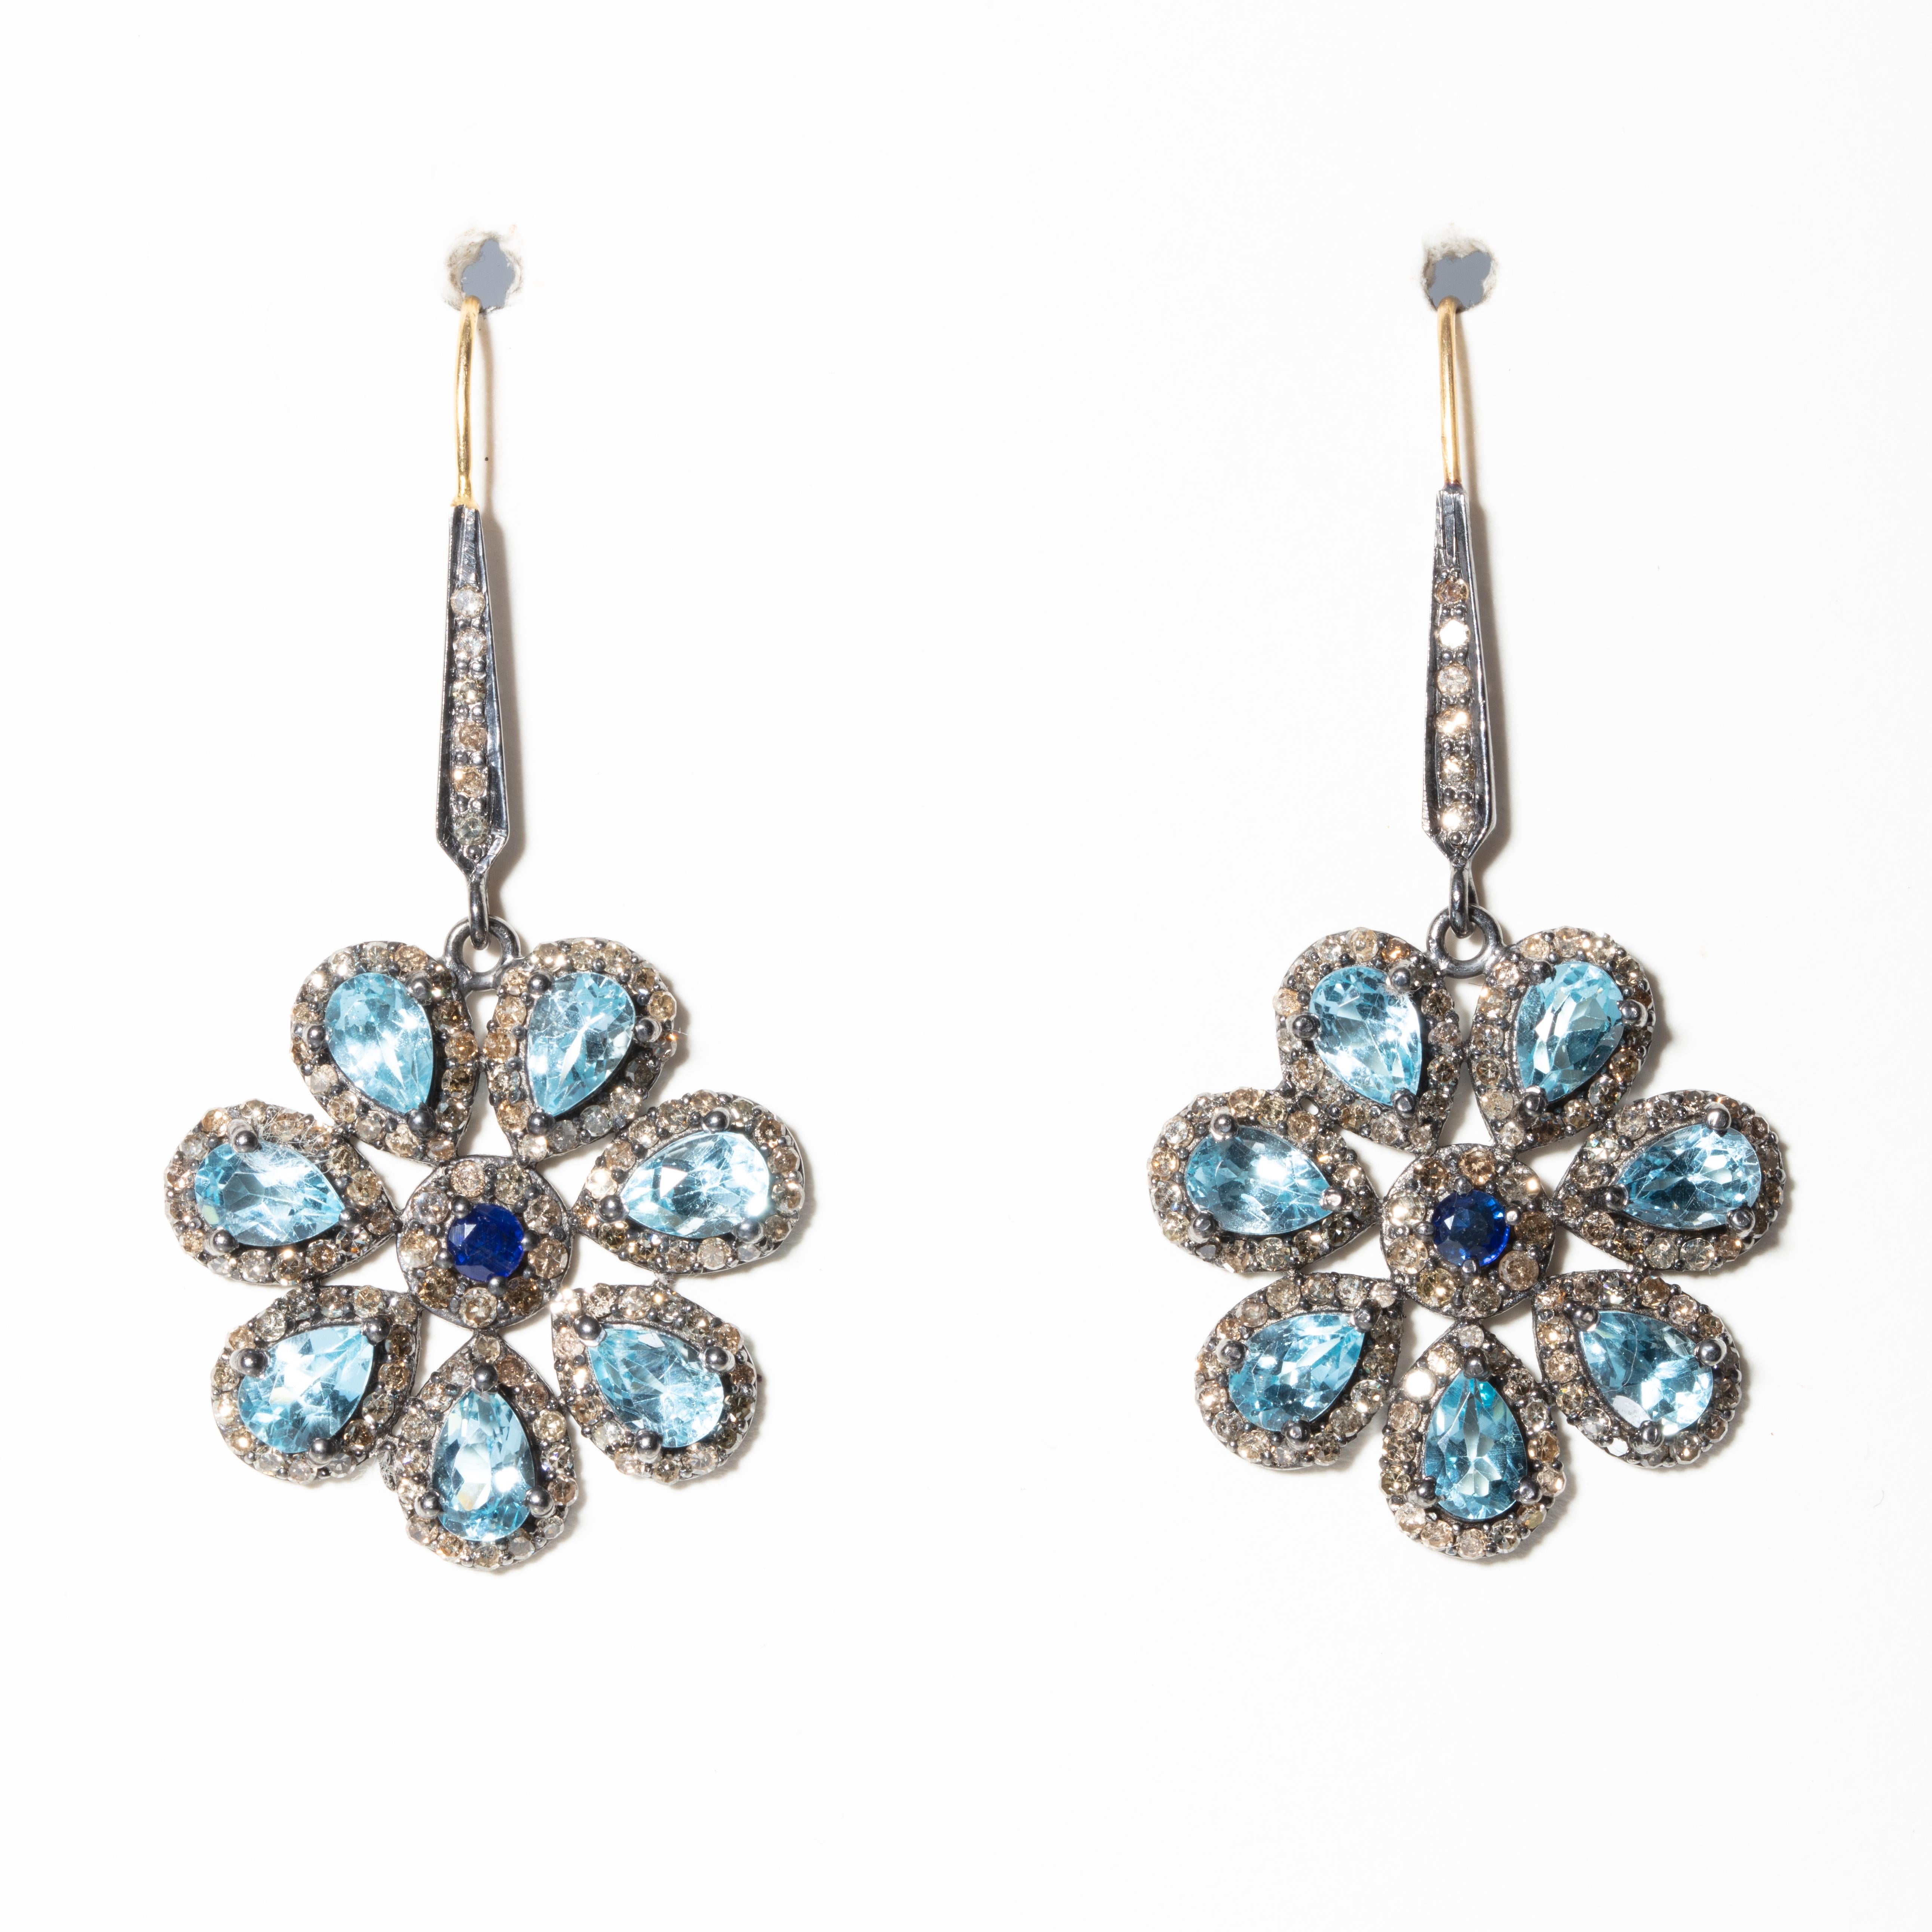 7 petal flower earrings in pear-shaped faceted blue topaz with a faceted center sapphire.  All are surrounded by pave`-set diamonds, and diamonds on the earring wire as well. Set in oxidized sterling with an 18K Gold French wire for pierced ears. 